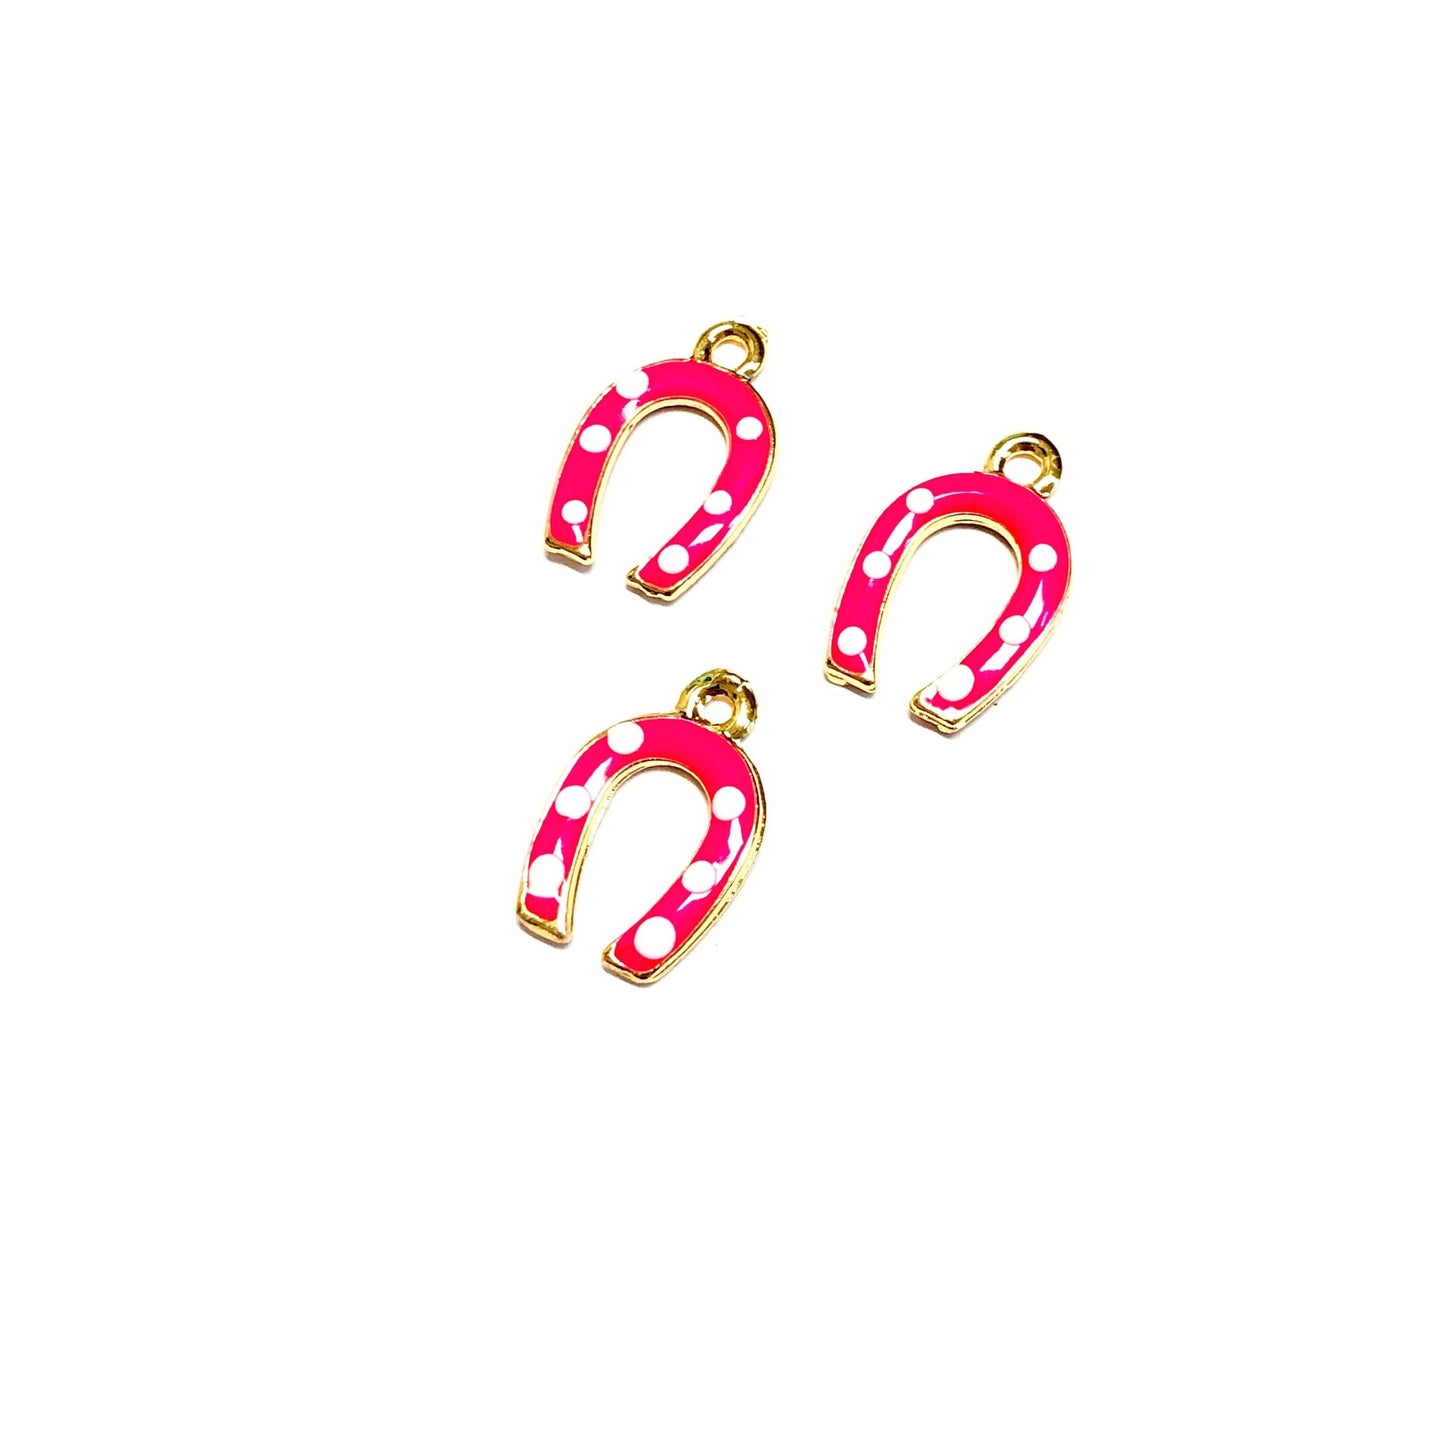 Gold Plated Enamel Horseshoe Shaking Attachment - Neon Pink, White